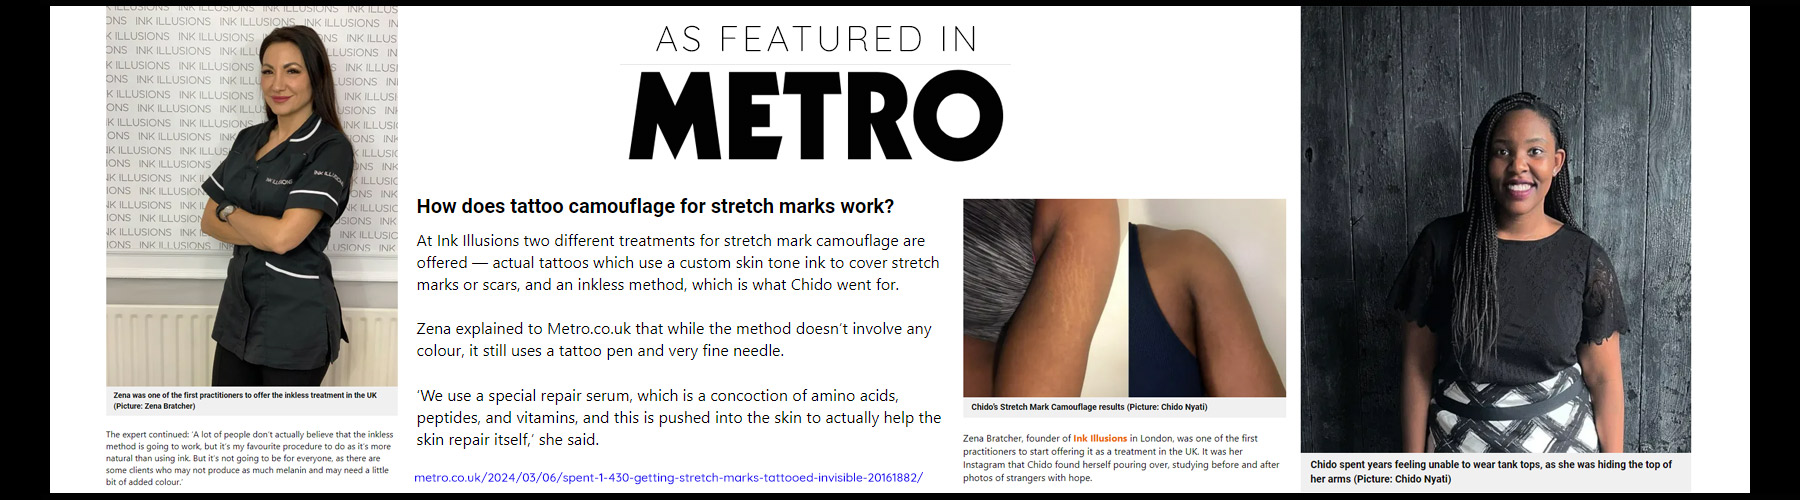 featured in Metro article on stretch marks